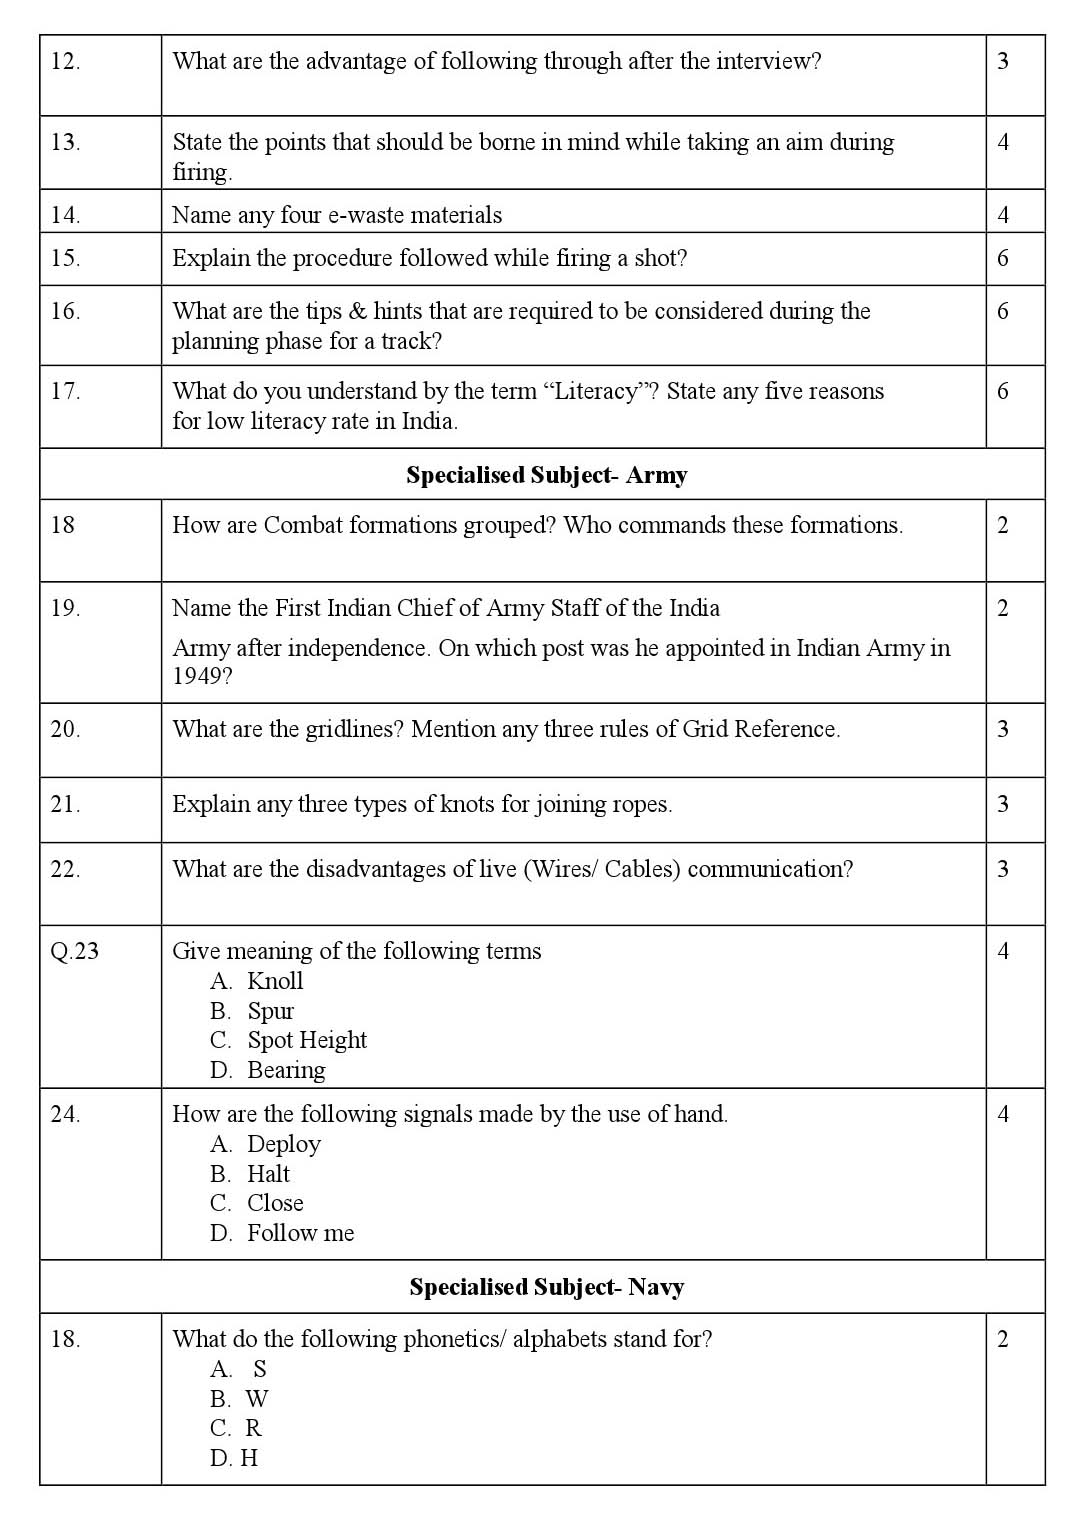 National Cadet Corps CBSE Class X Sample Question Paper 2018-19 - Image 2